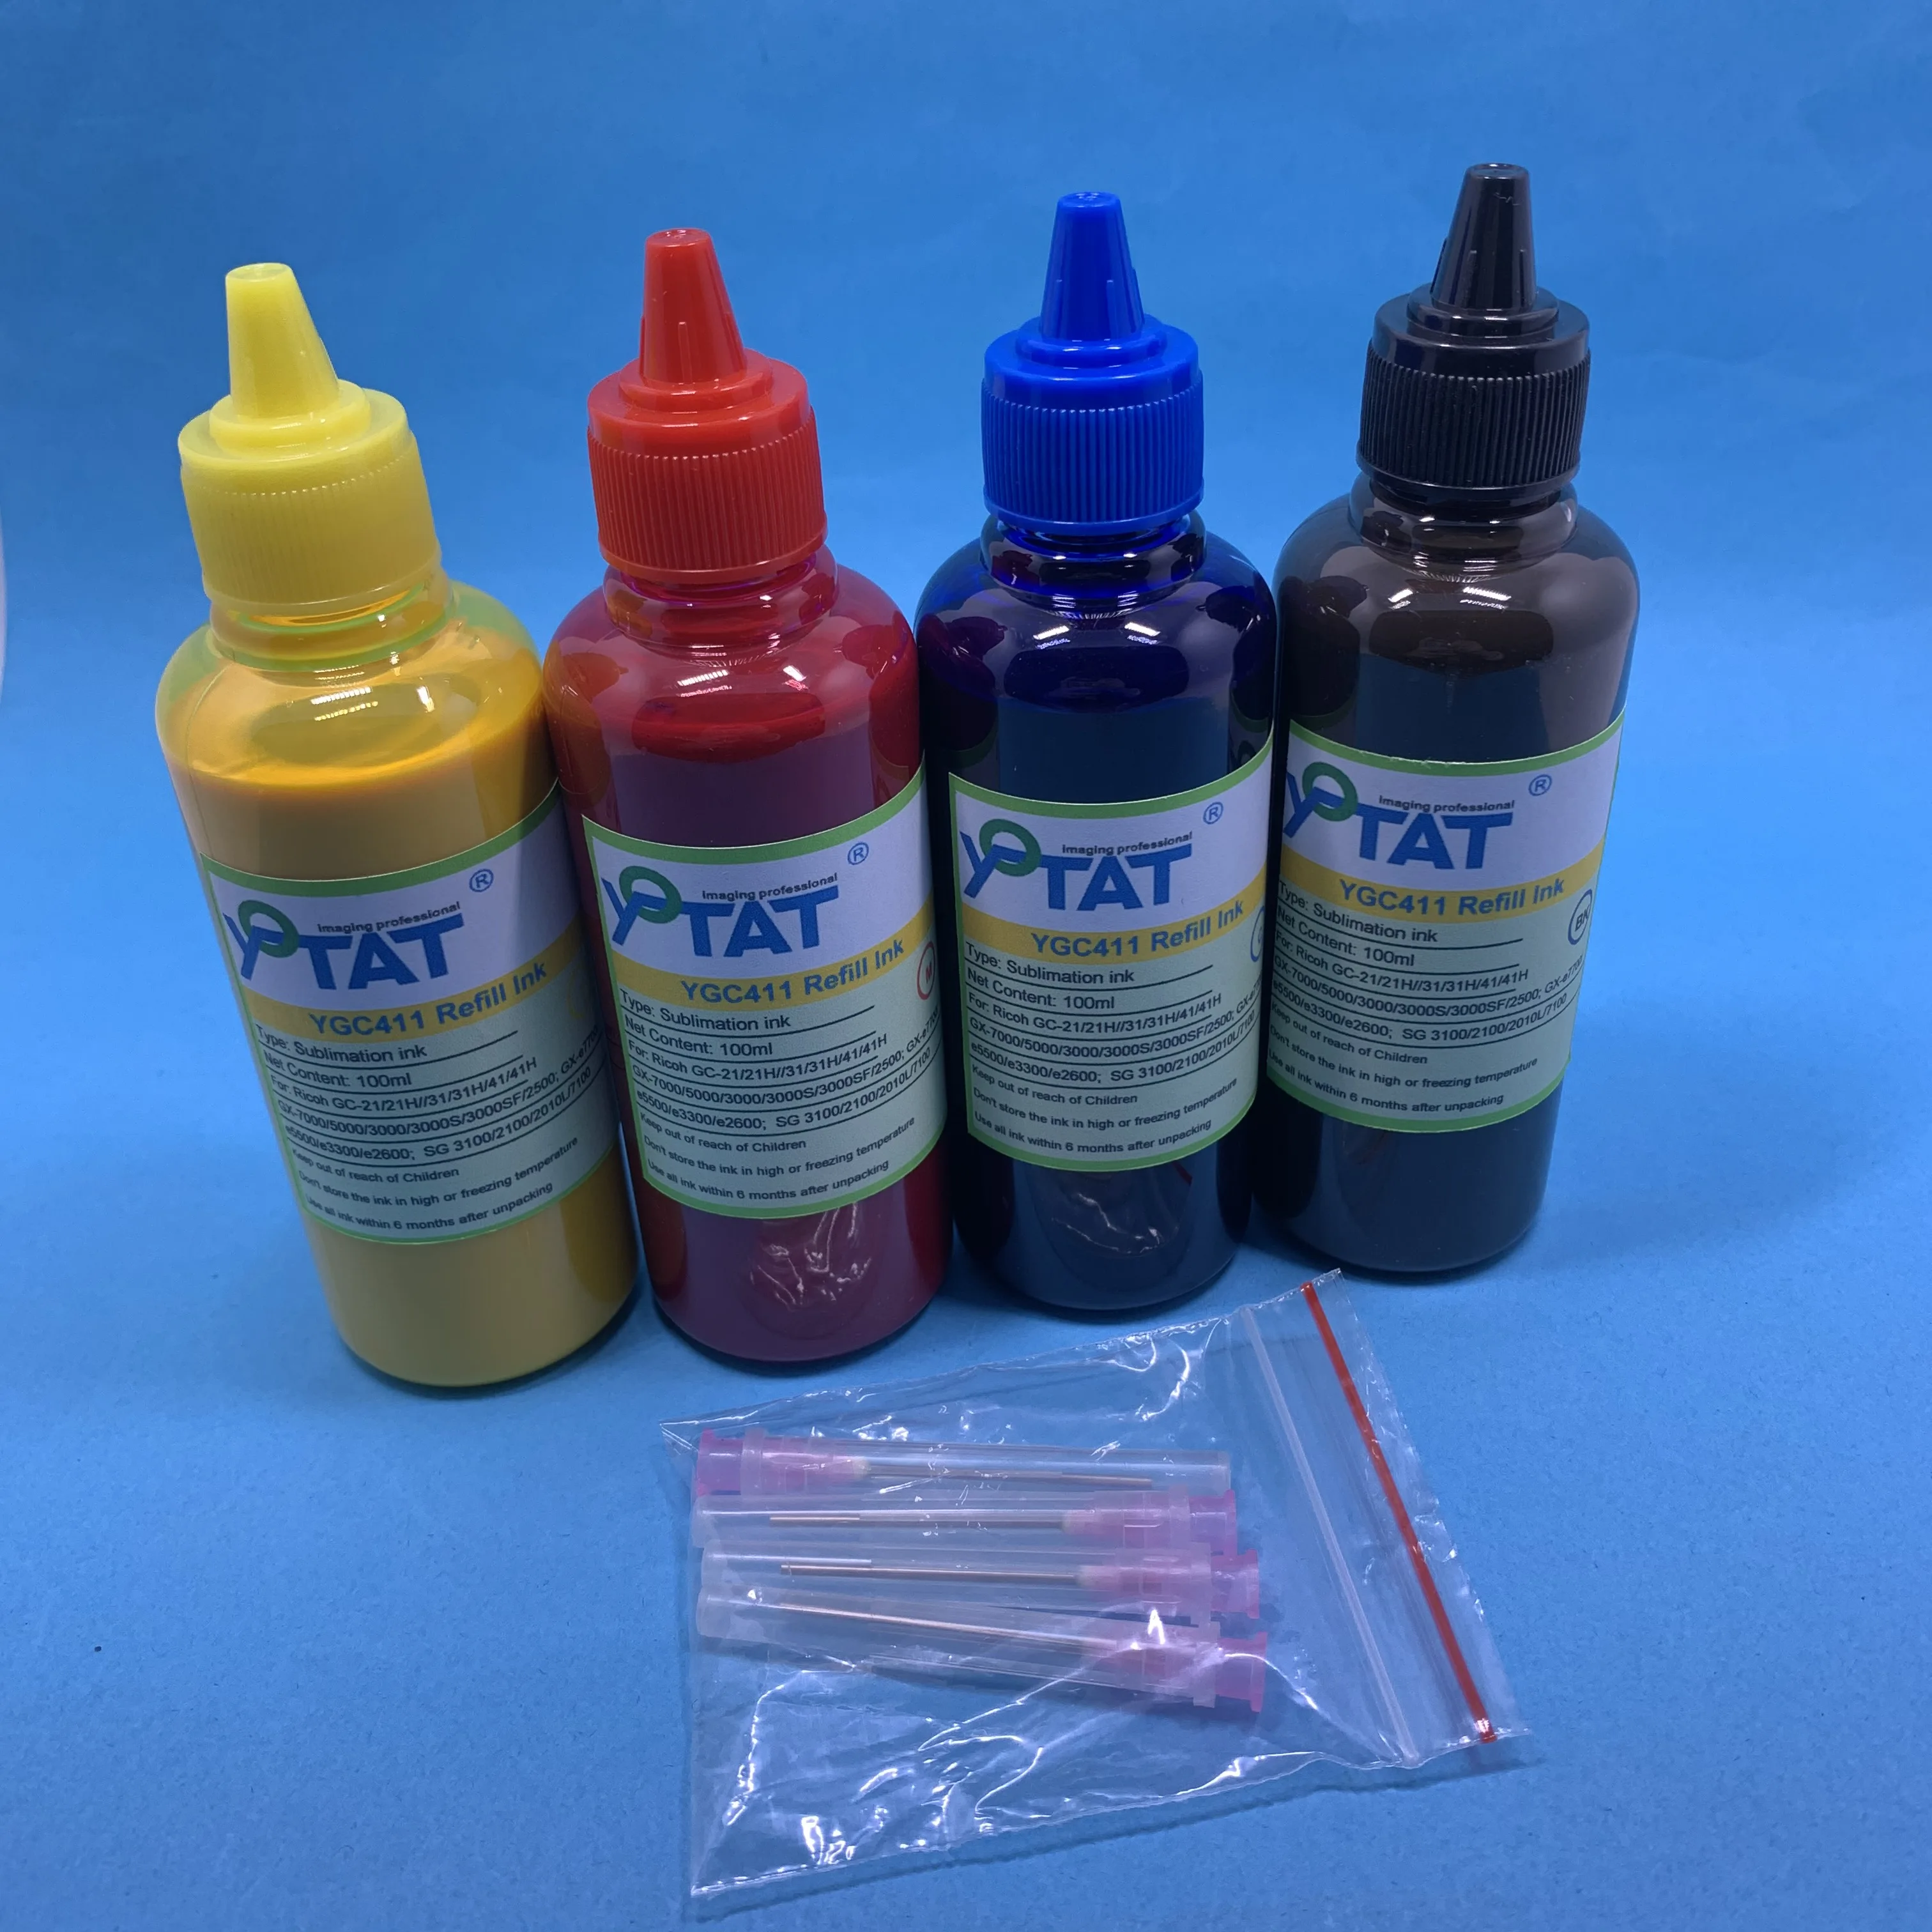 

YOTAT Sublimation Ink for GC41 GC-41 GC41H for Ricoh IPSiO SG 2010L/2100/2200/3100/3200/7100